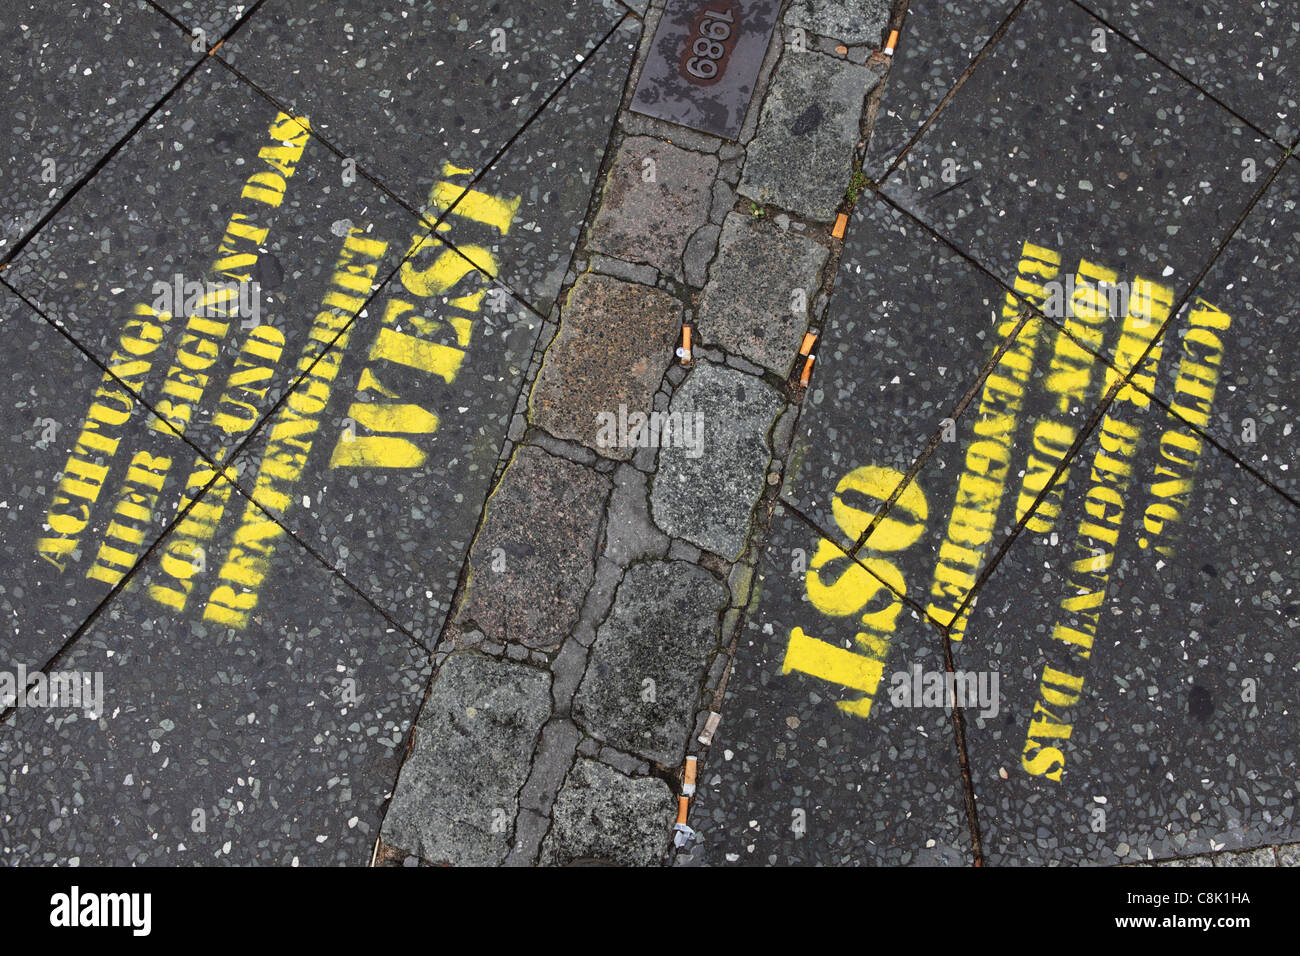 Political graffiti by the outline of what was once the Berlin Wall in Berlin, Germany. Stock Photo